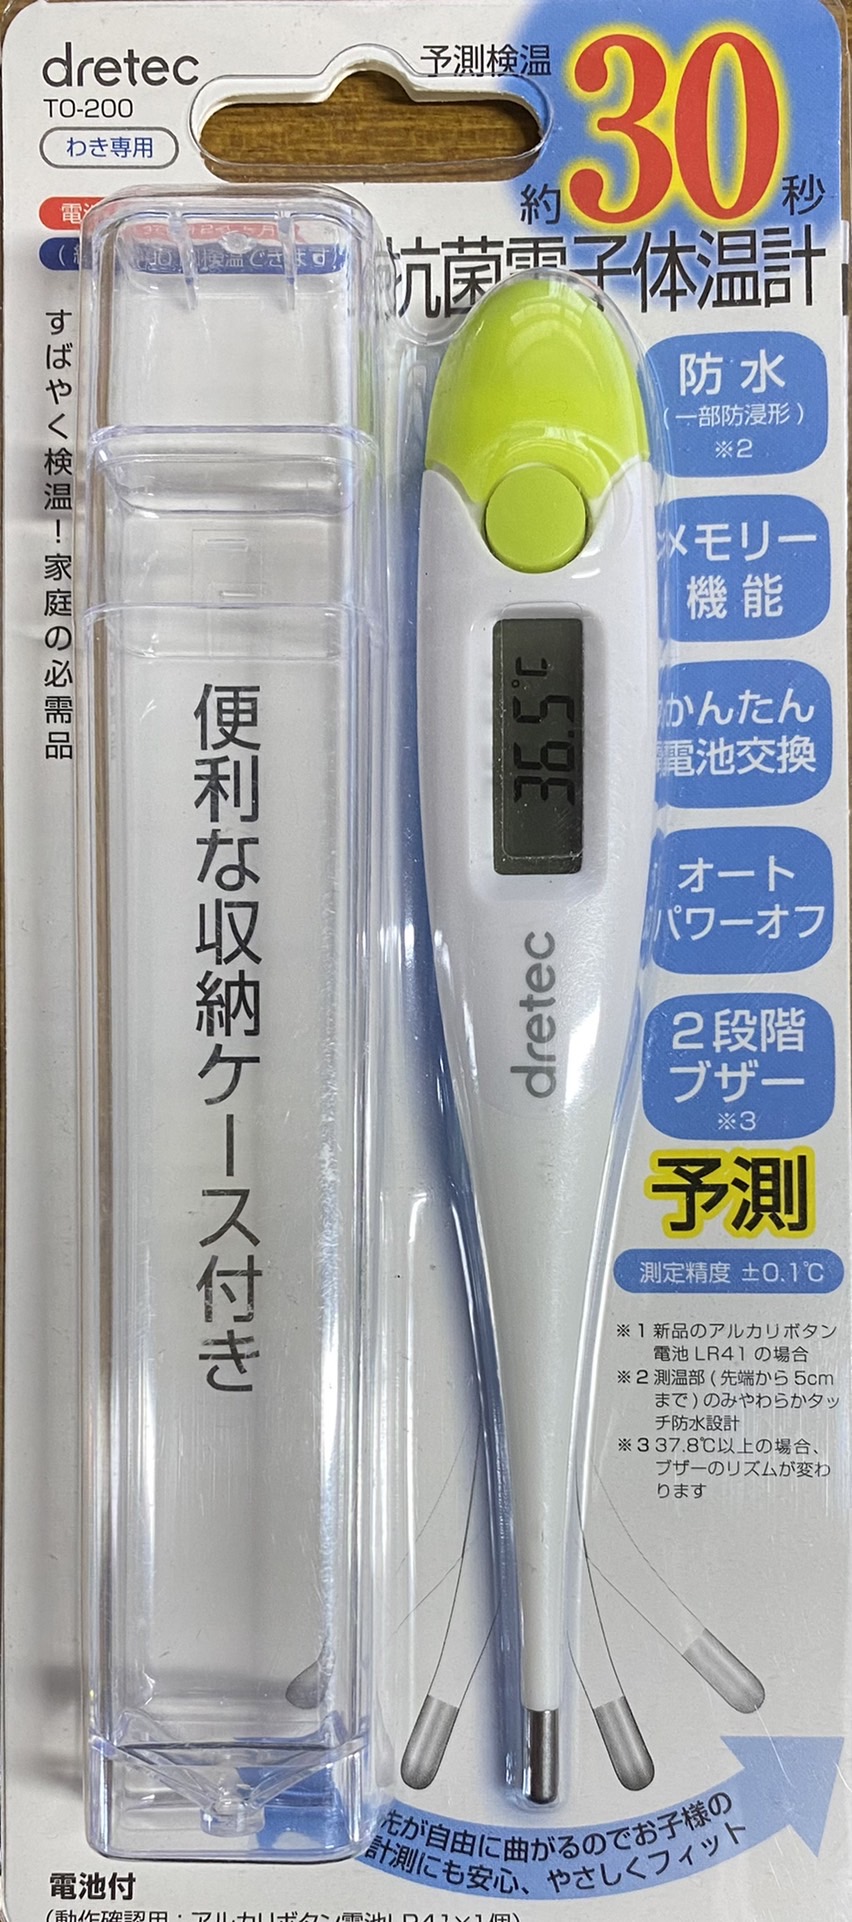 doli Tec soft Touch medical thermometer green TO-200GND approximately 30 second forecast inspection temperature forecast type + measurement type anti-bacterial type 